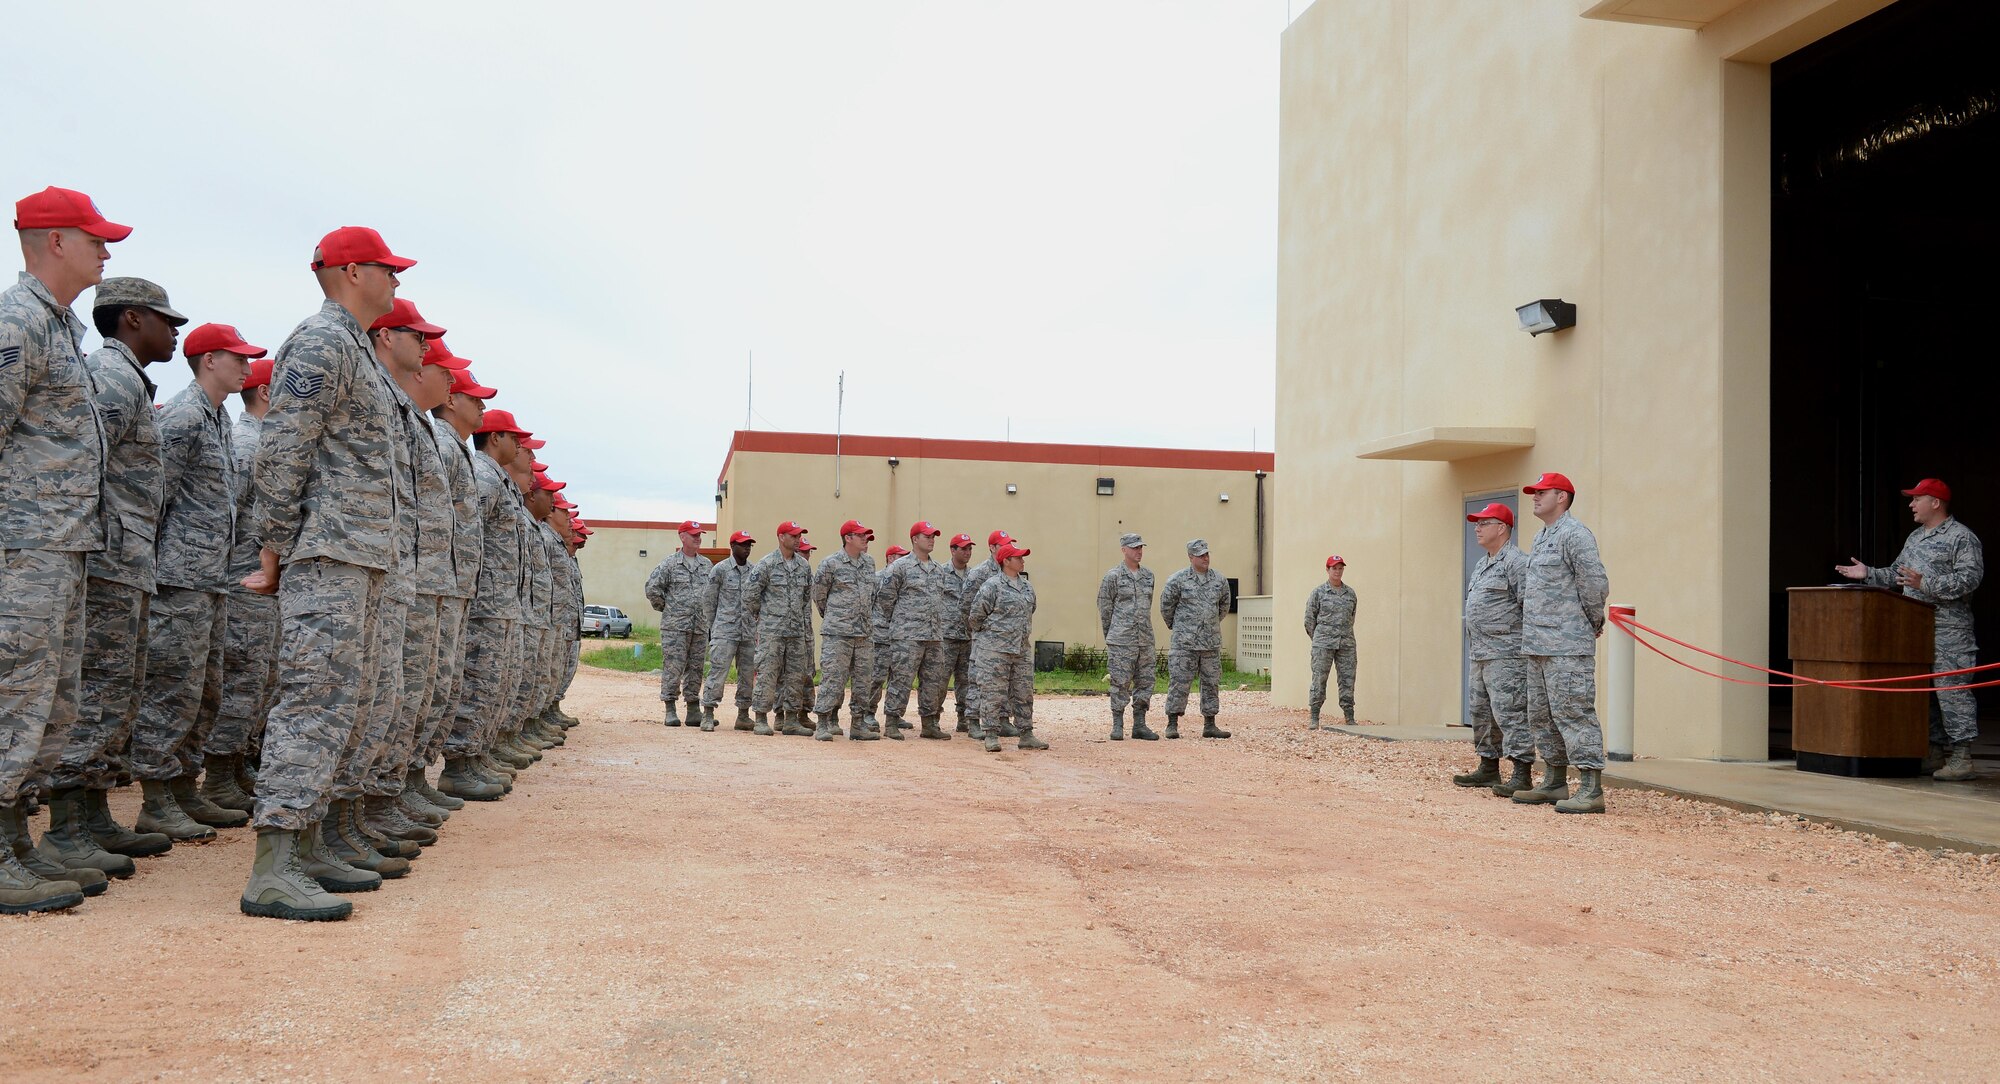 Airmen with the 556th, 554th and 254th RED HORSE Squadrons attend a ribbon cutting ceremony July 26, 2016, at Andersen Air Force Base, Guam. The five-month long project brought together Reservists from four RHS units consisting of nine rotations for hands-on training with the 556th RHS as the lead unit for the duration of the project.  (U.S. Air Force photo/Airman 1st Class Arielle Vasquez)